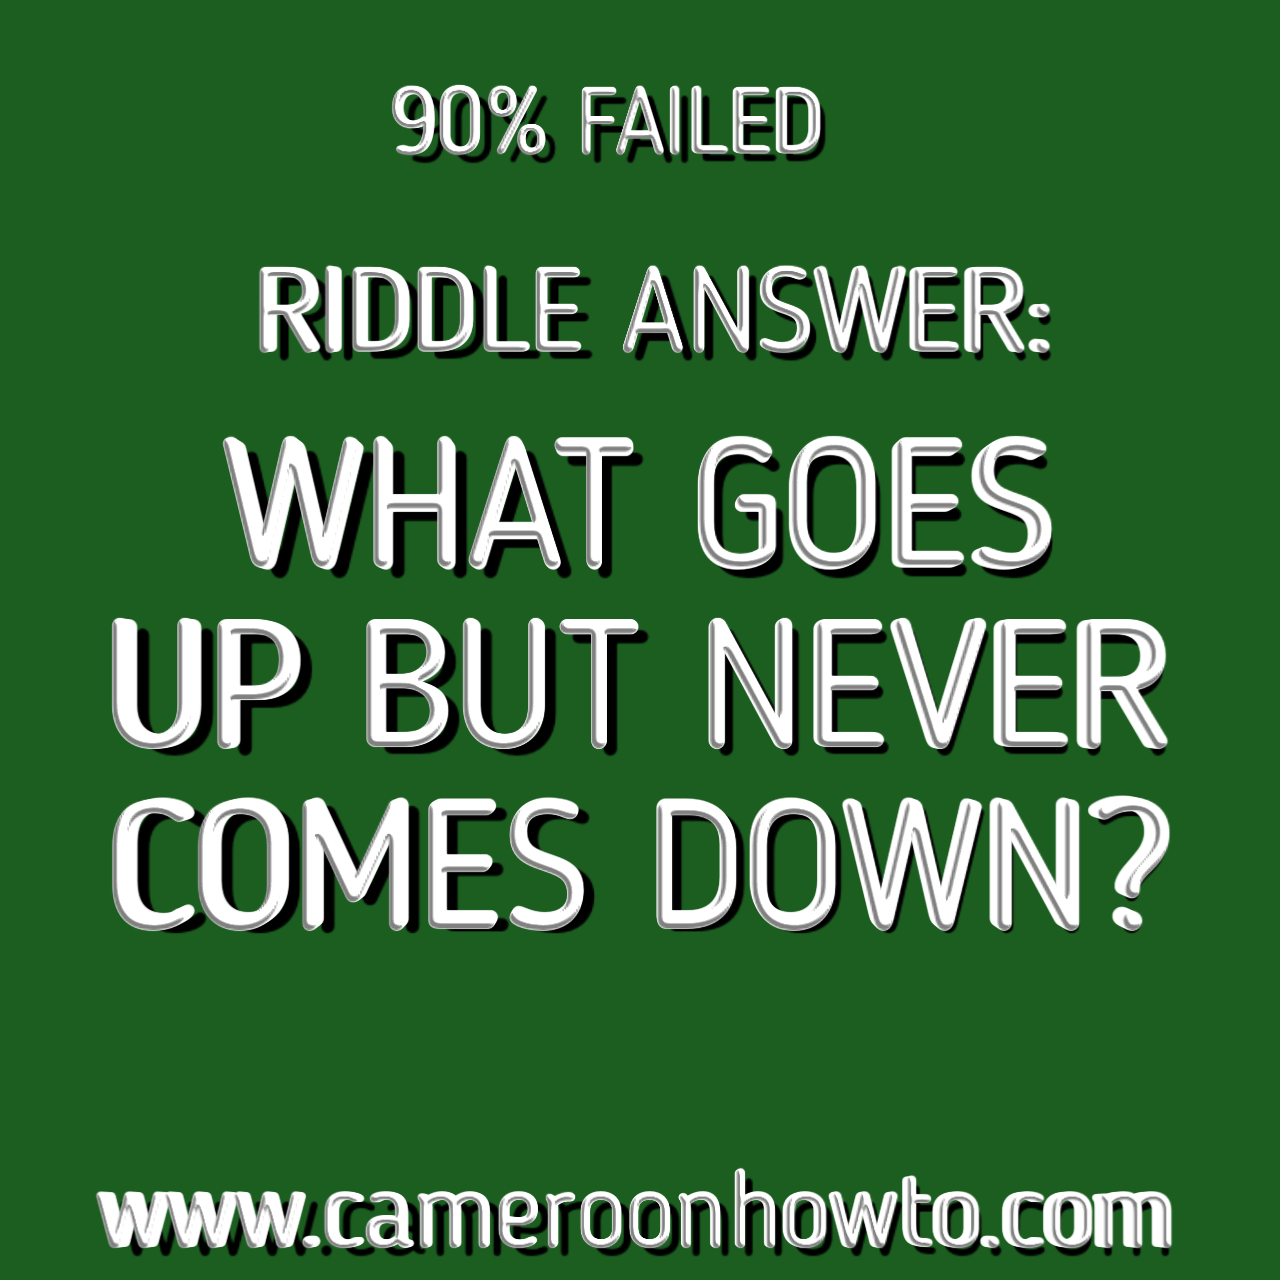 What goes up but never comes down riddle answer